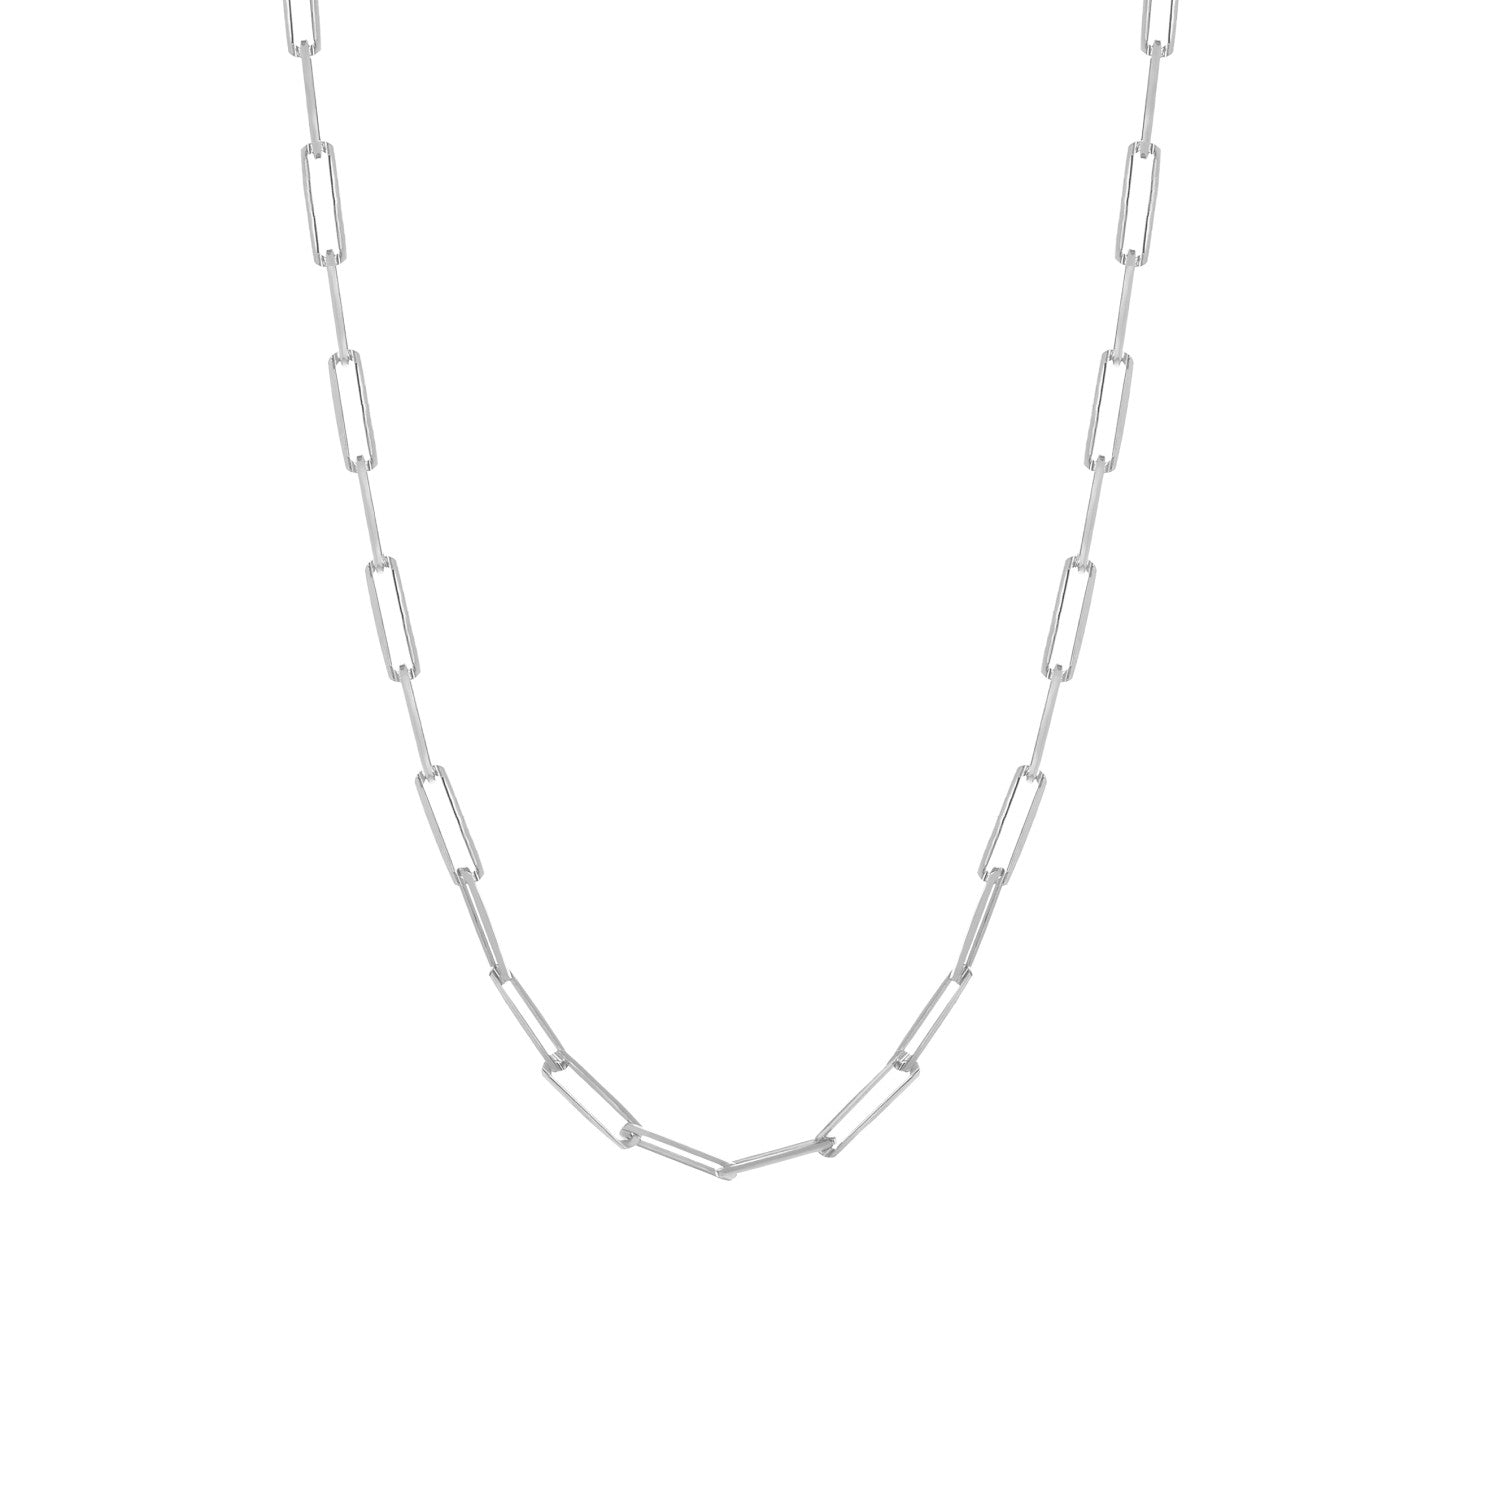 Smooth silver chain with paper-clip link design necklace